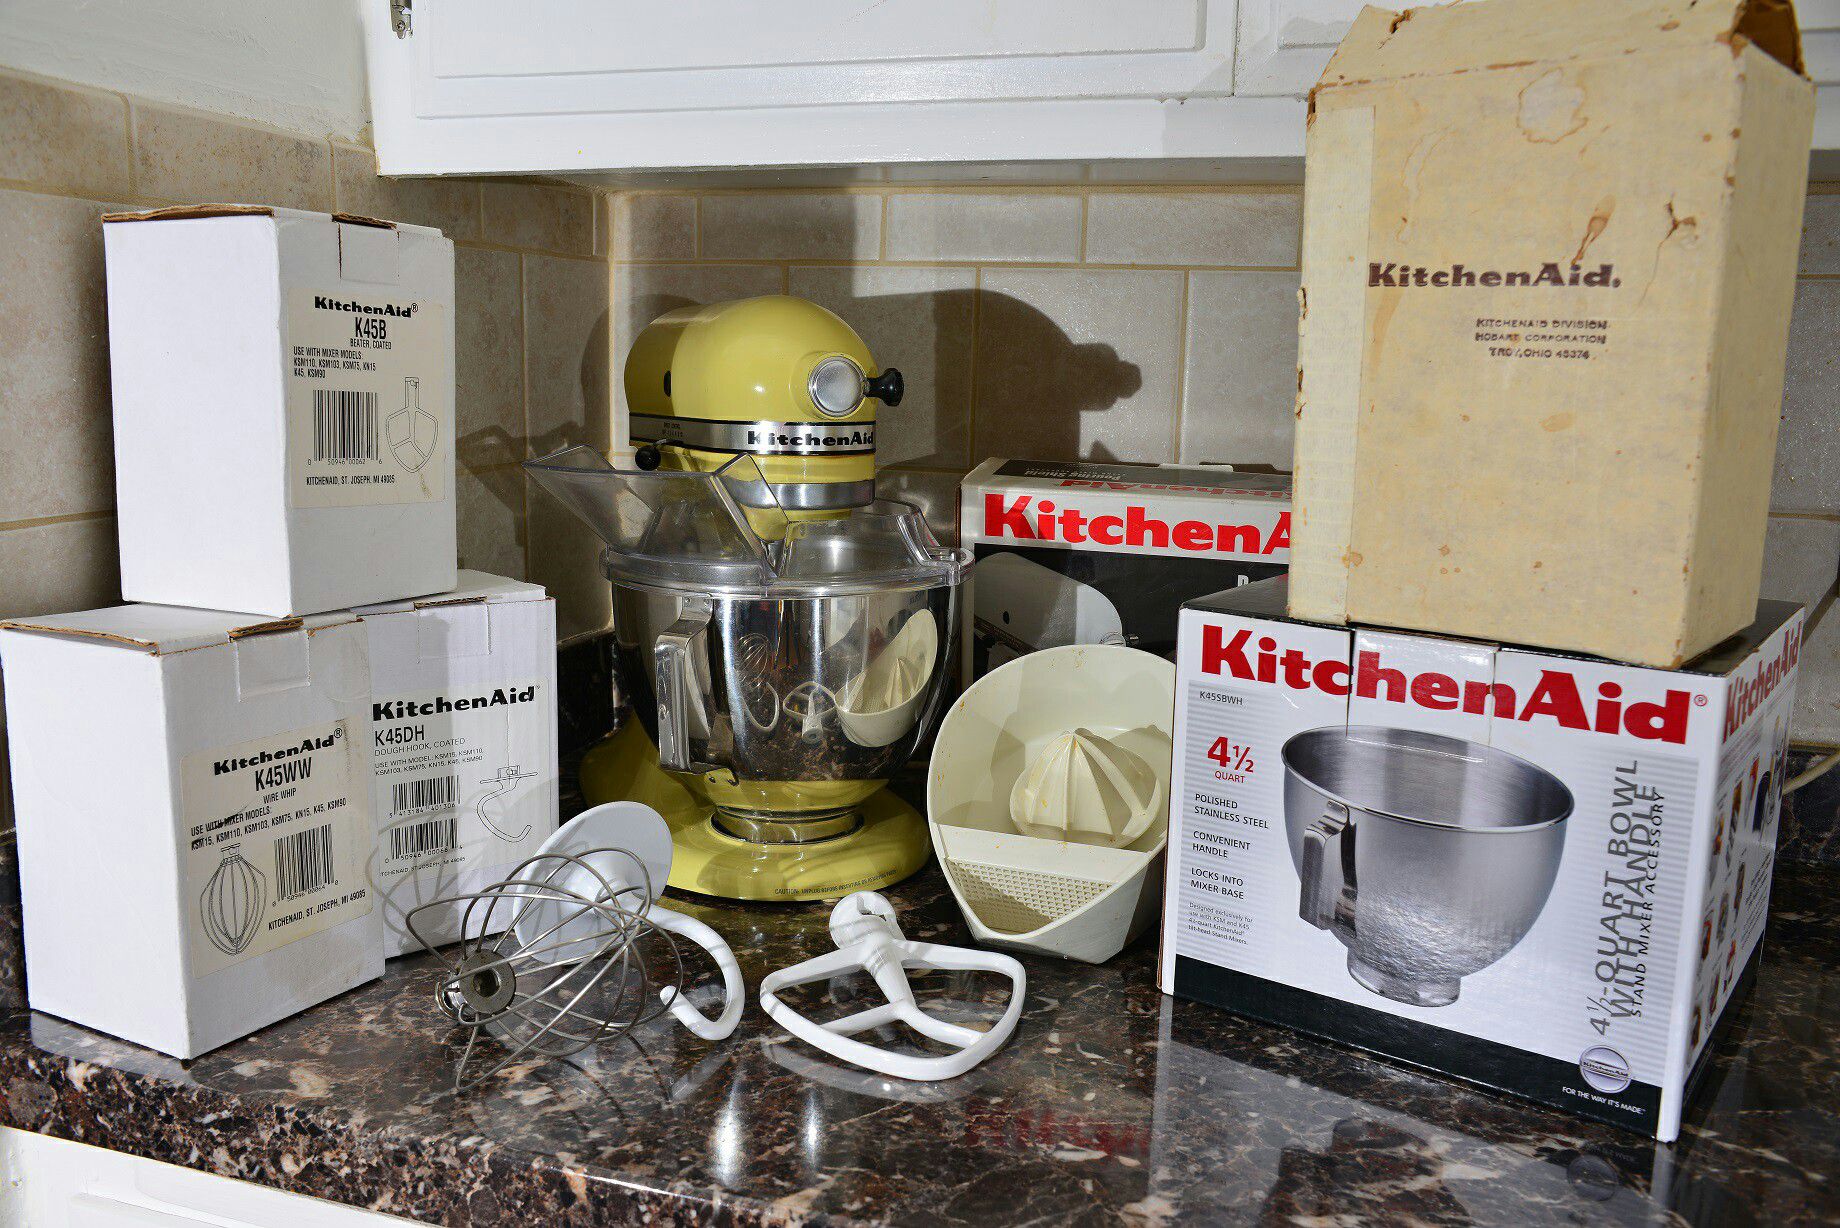 HOBART - KITCHENAID K45 MIXER - LATE PRE-SOLID STATE - BOWL, JUICER, POURING SHIELD, ATTACHMENTS